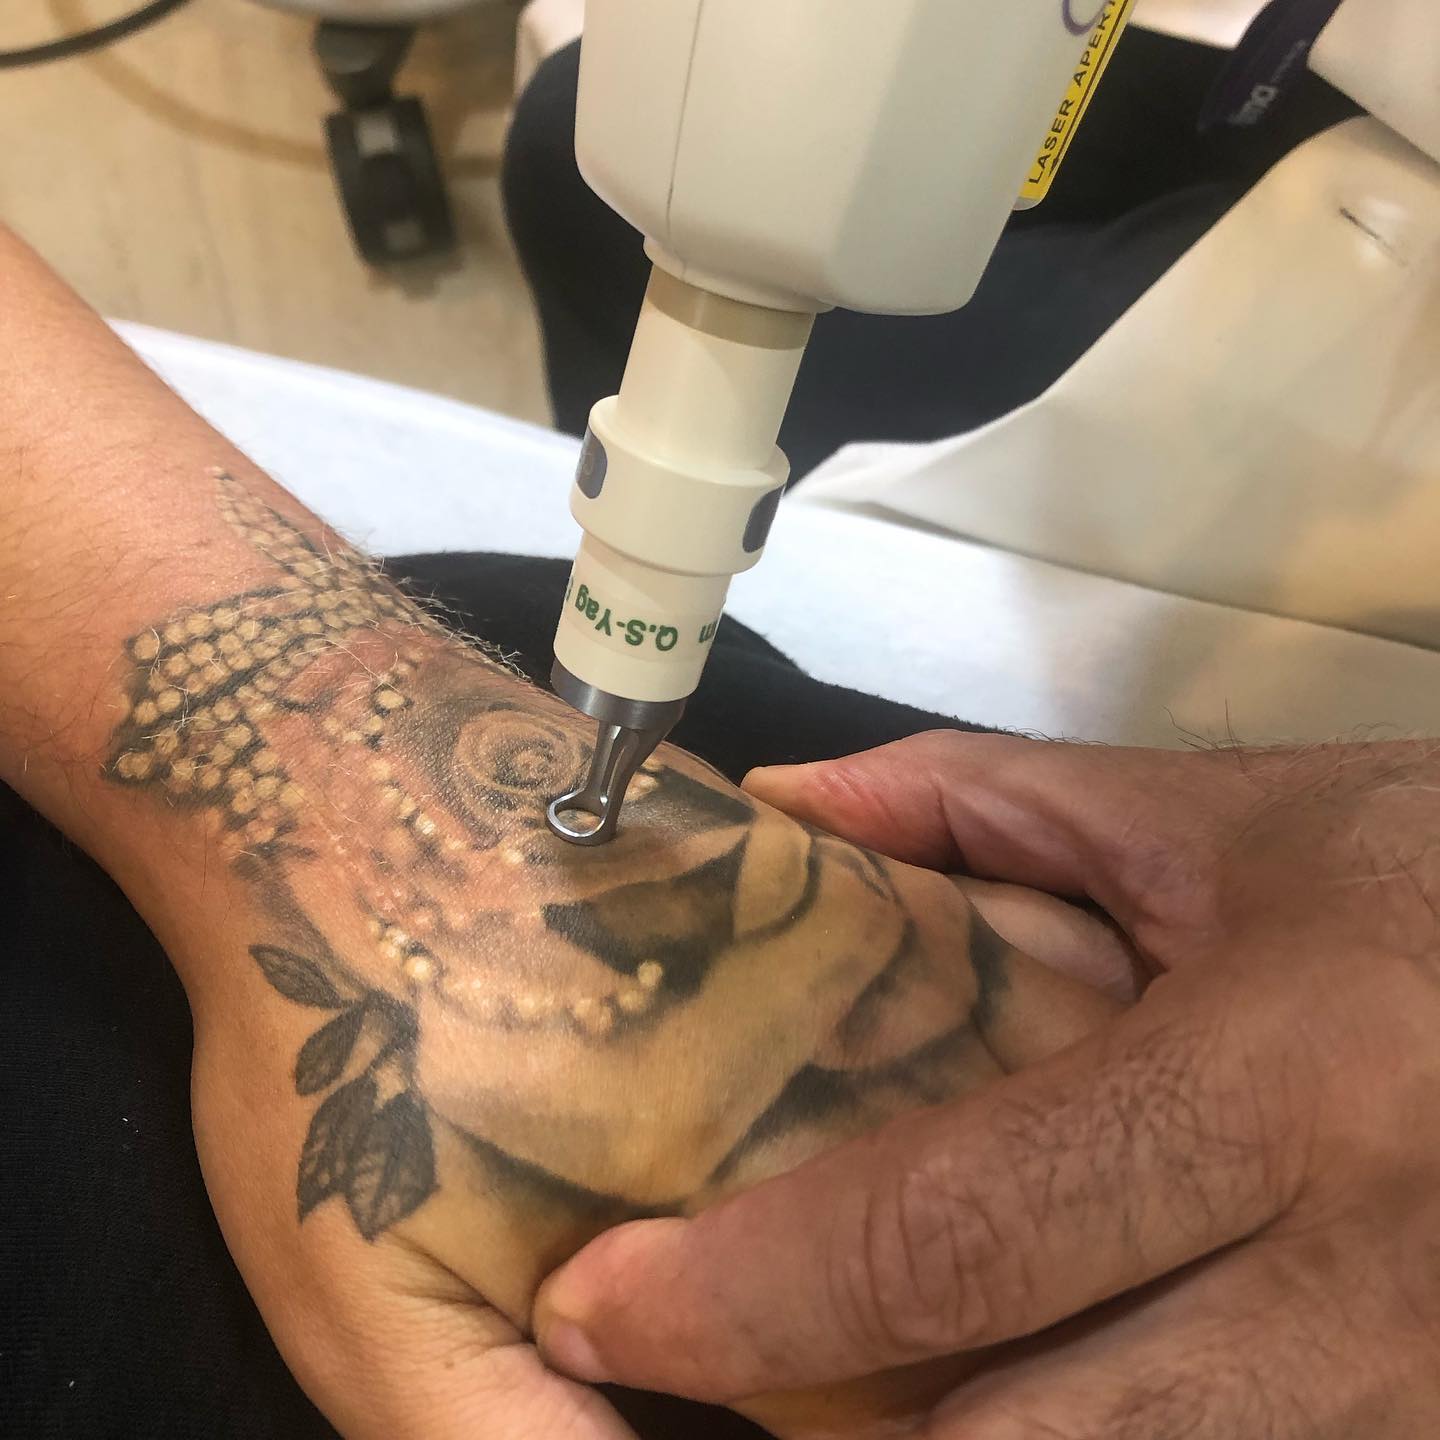 Motor City Tattoo Studiooshawaon  Check out this laser tattoo removal  success story A client had a large piece removedfaded with us here at MCT  then covered up the new empty space